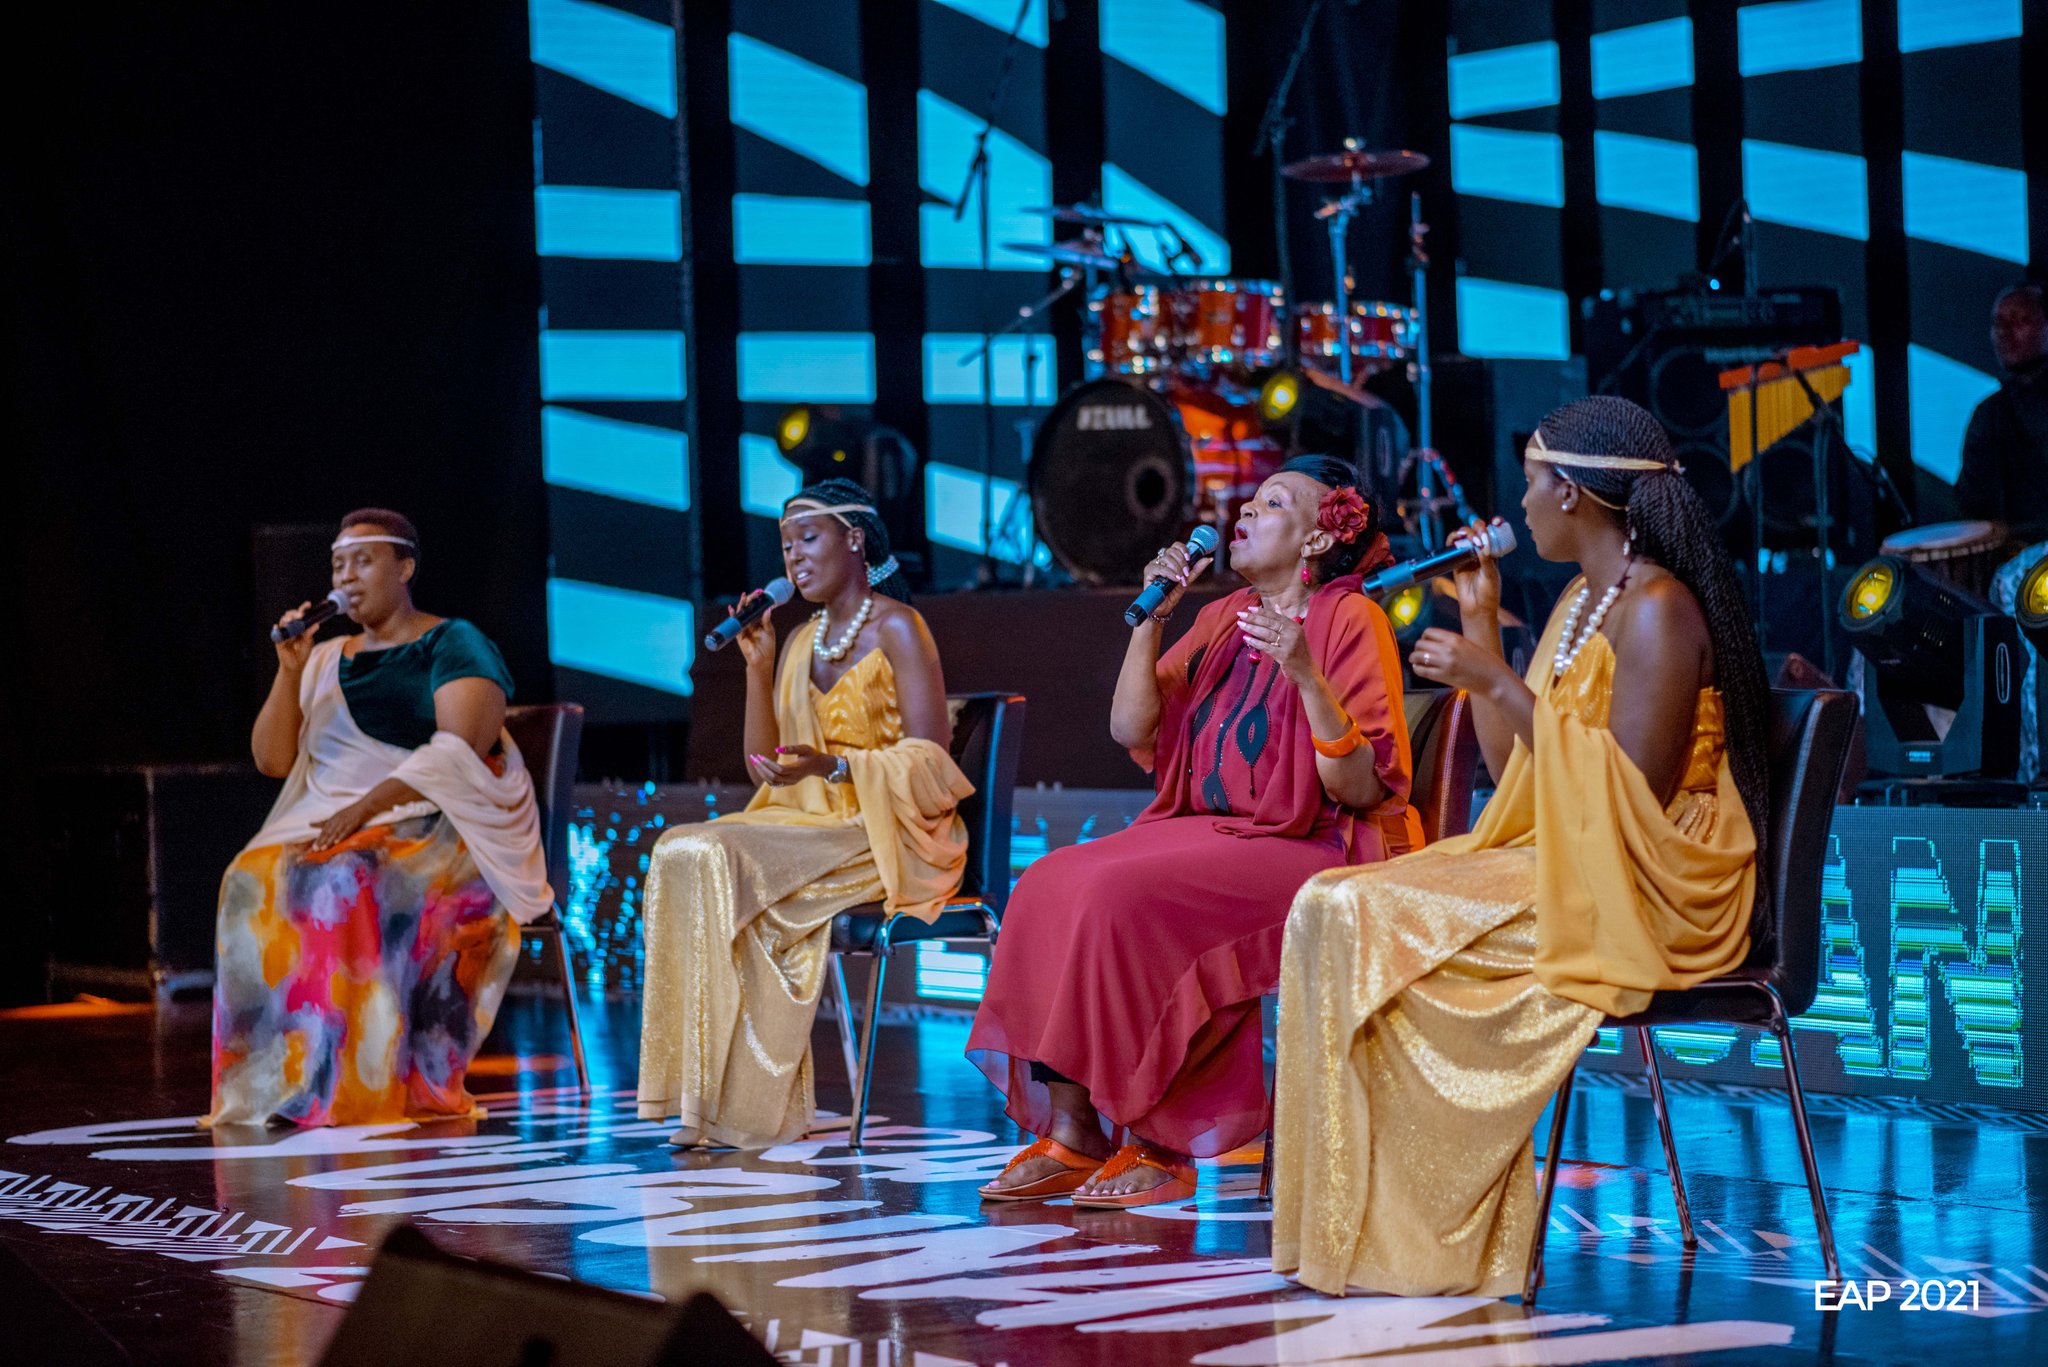 Legendary musician Cecile Kayirebwa was performing alongside Ange and Pamela who are known for preforming her songs, and those of late Kamariza, at different cultural events. 